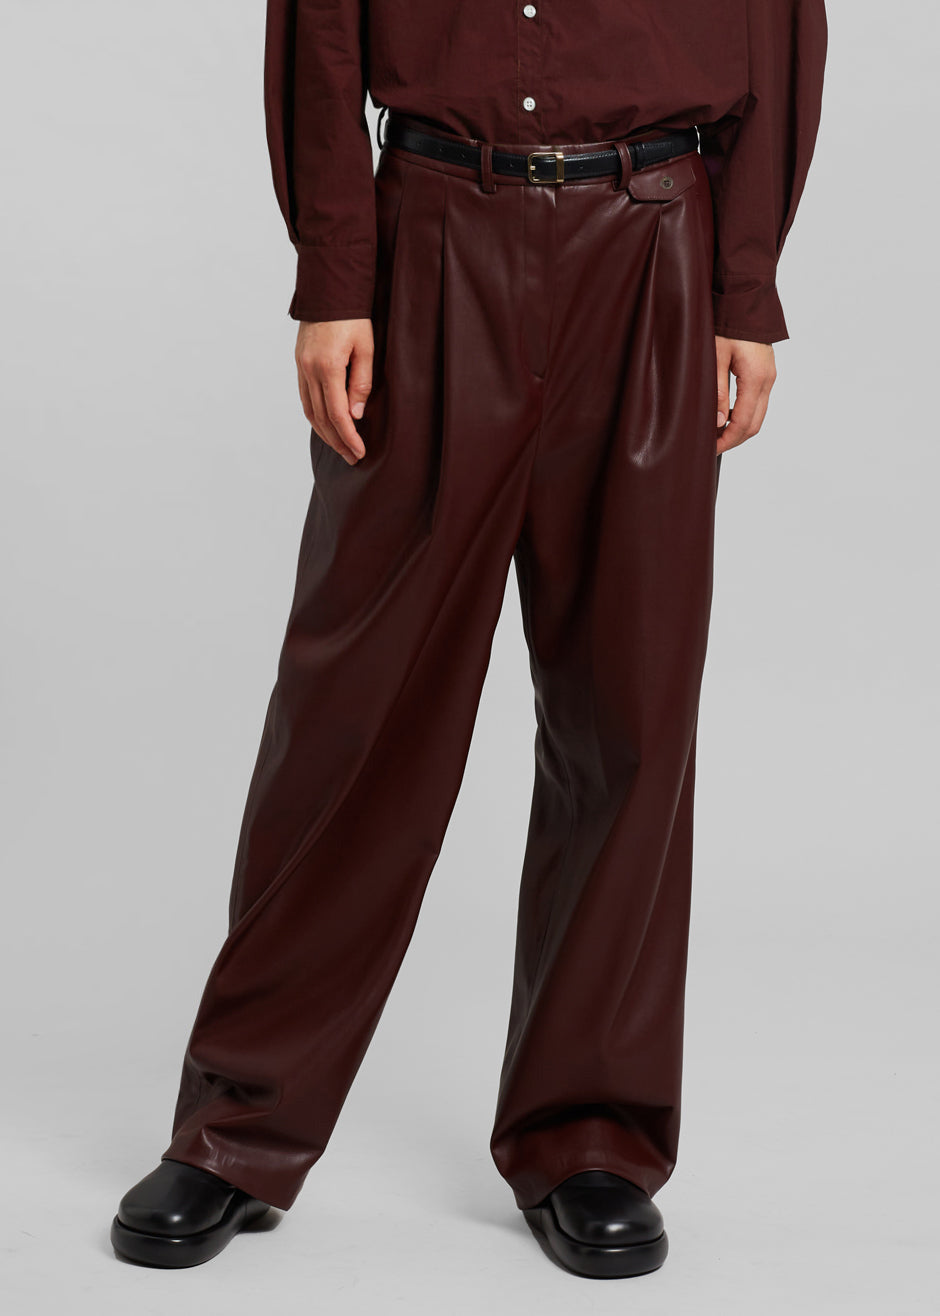 Pernille Faux Leather Pants - Burgundy - 2